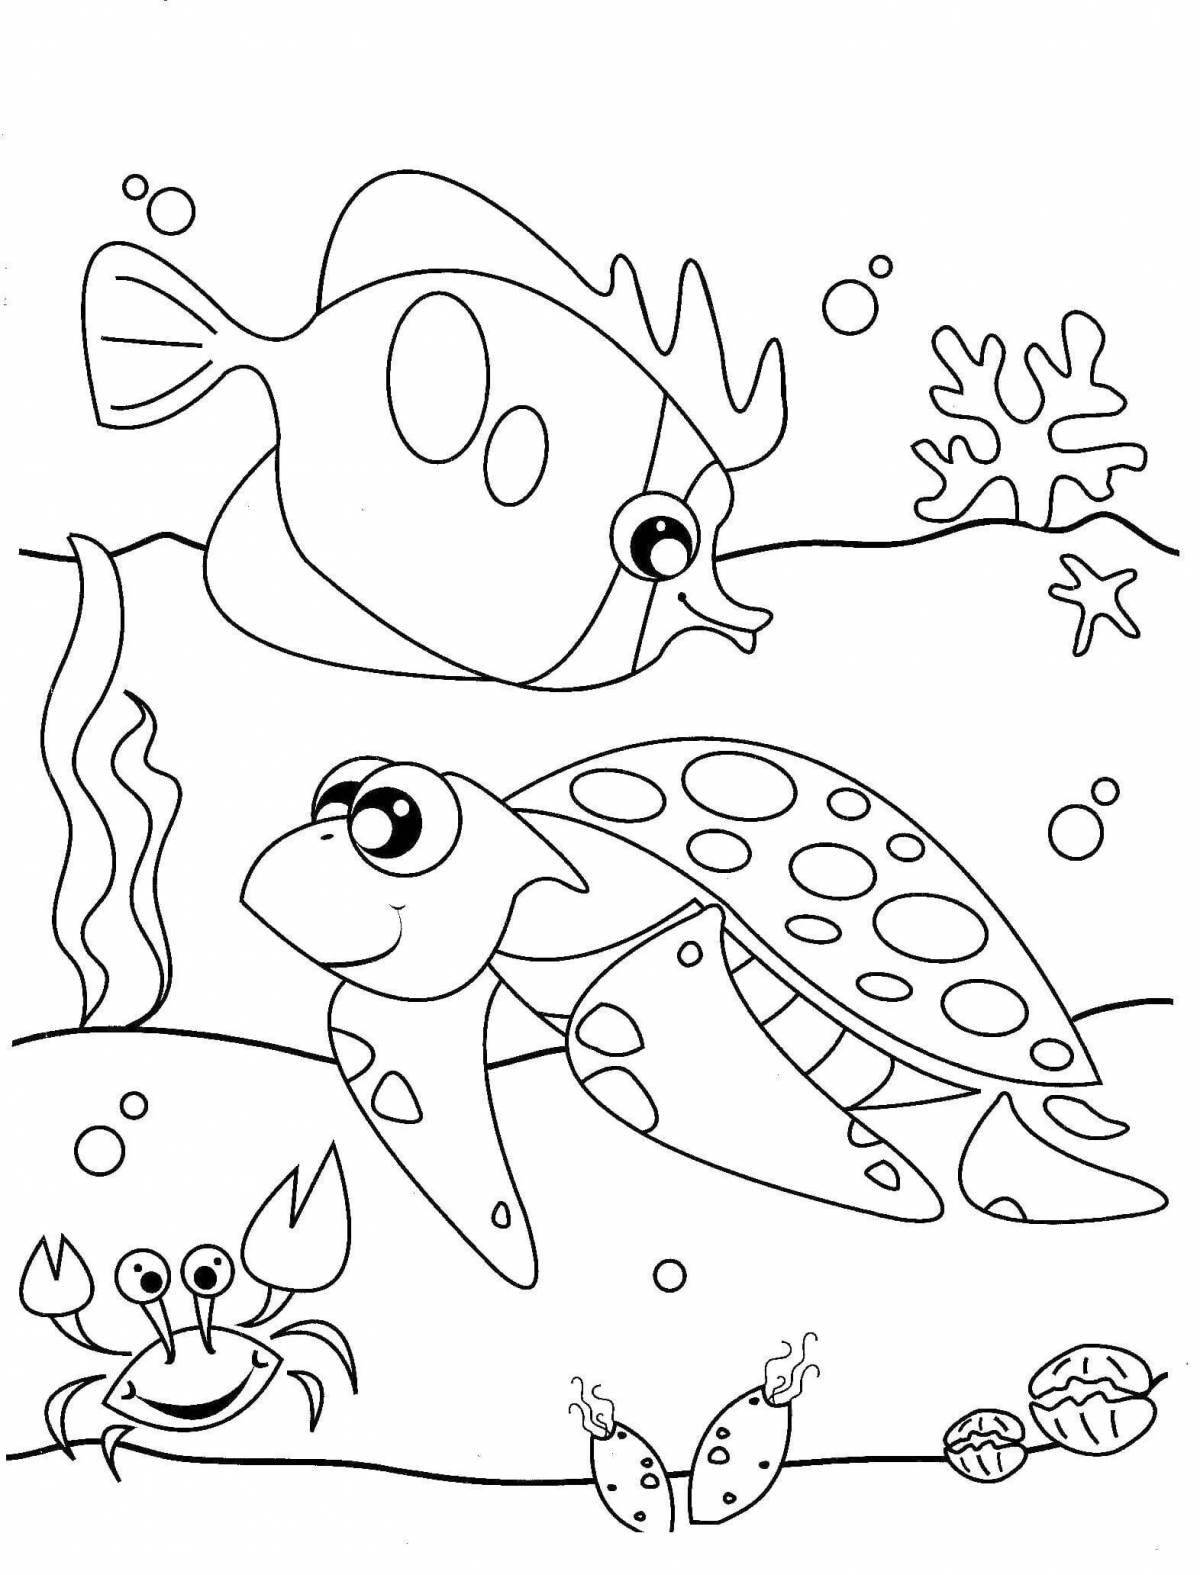 Colorful sea life coloring book for kids